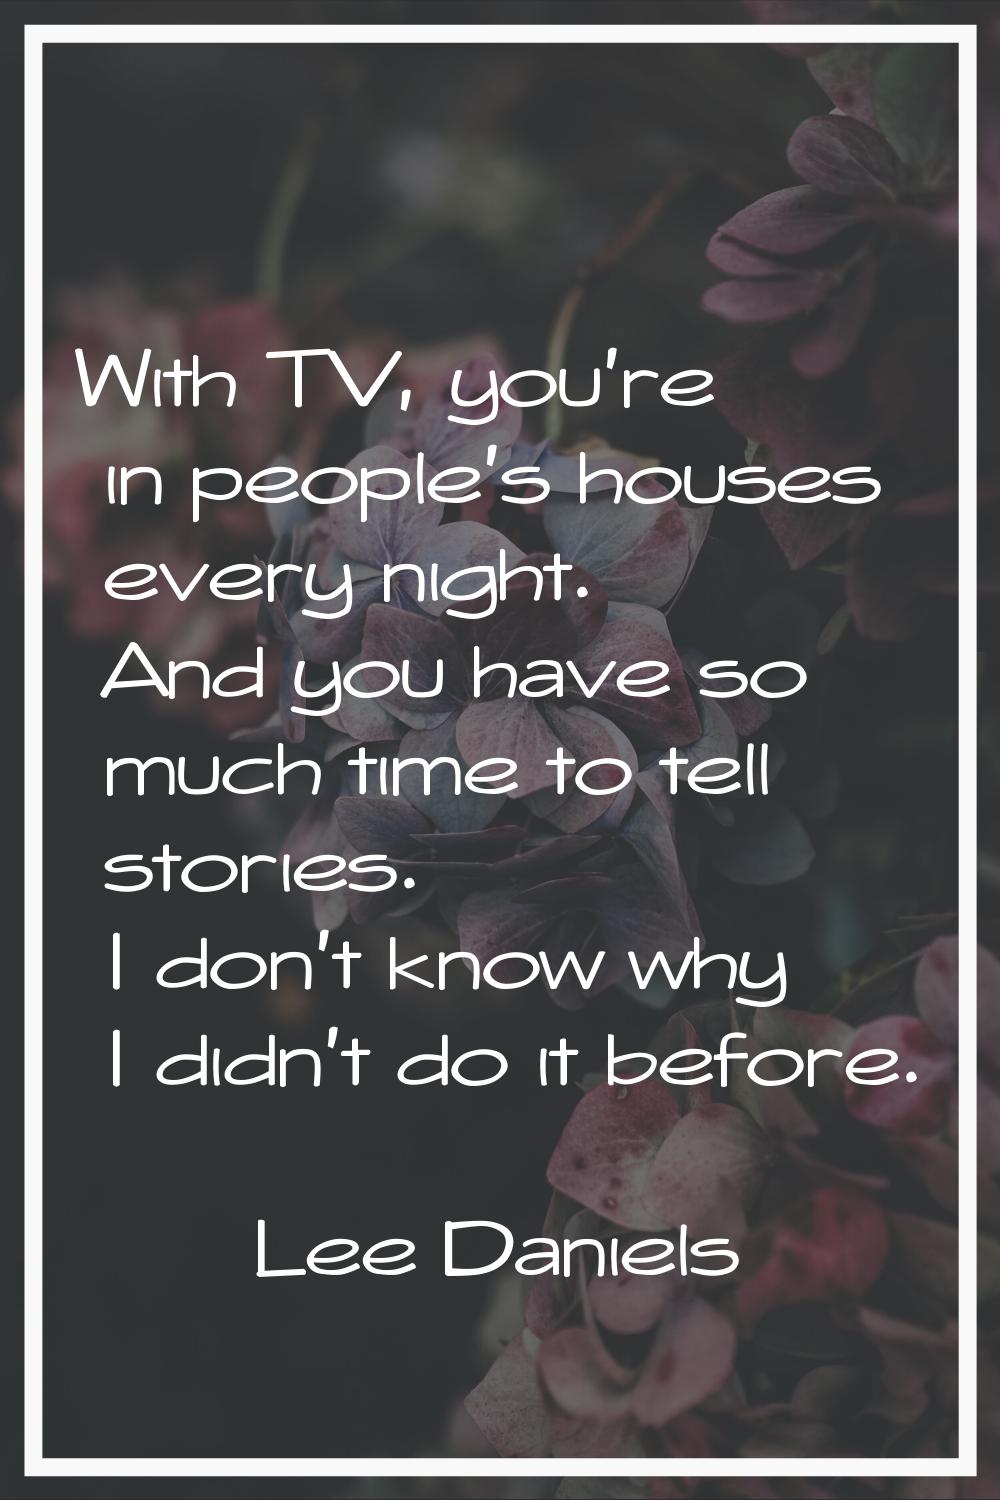 With TV, you're in people's houses every night. And you have so much time to tell stories. I don't 